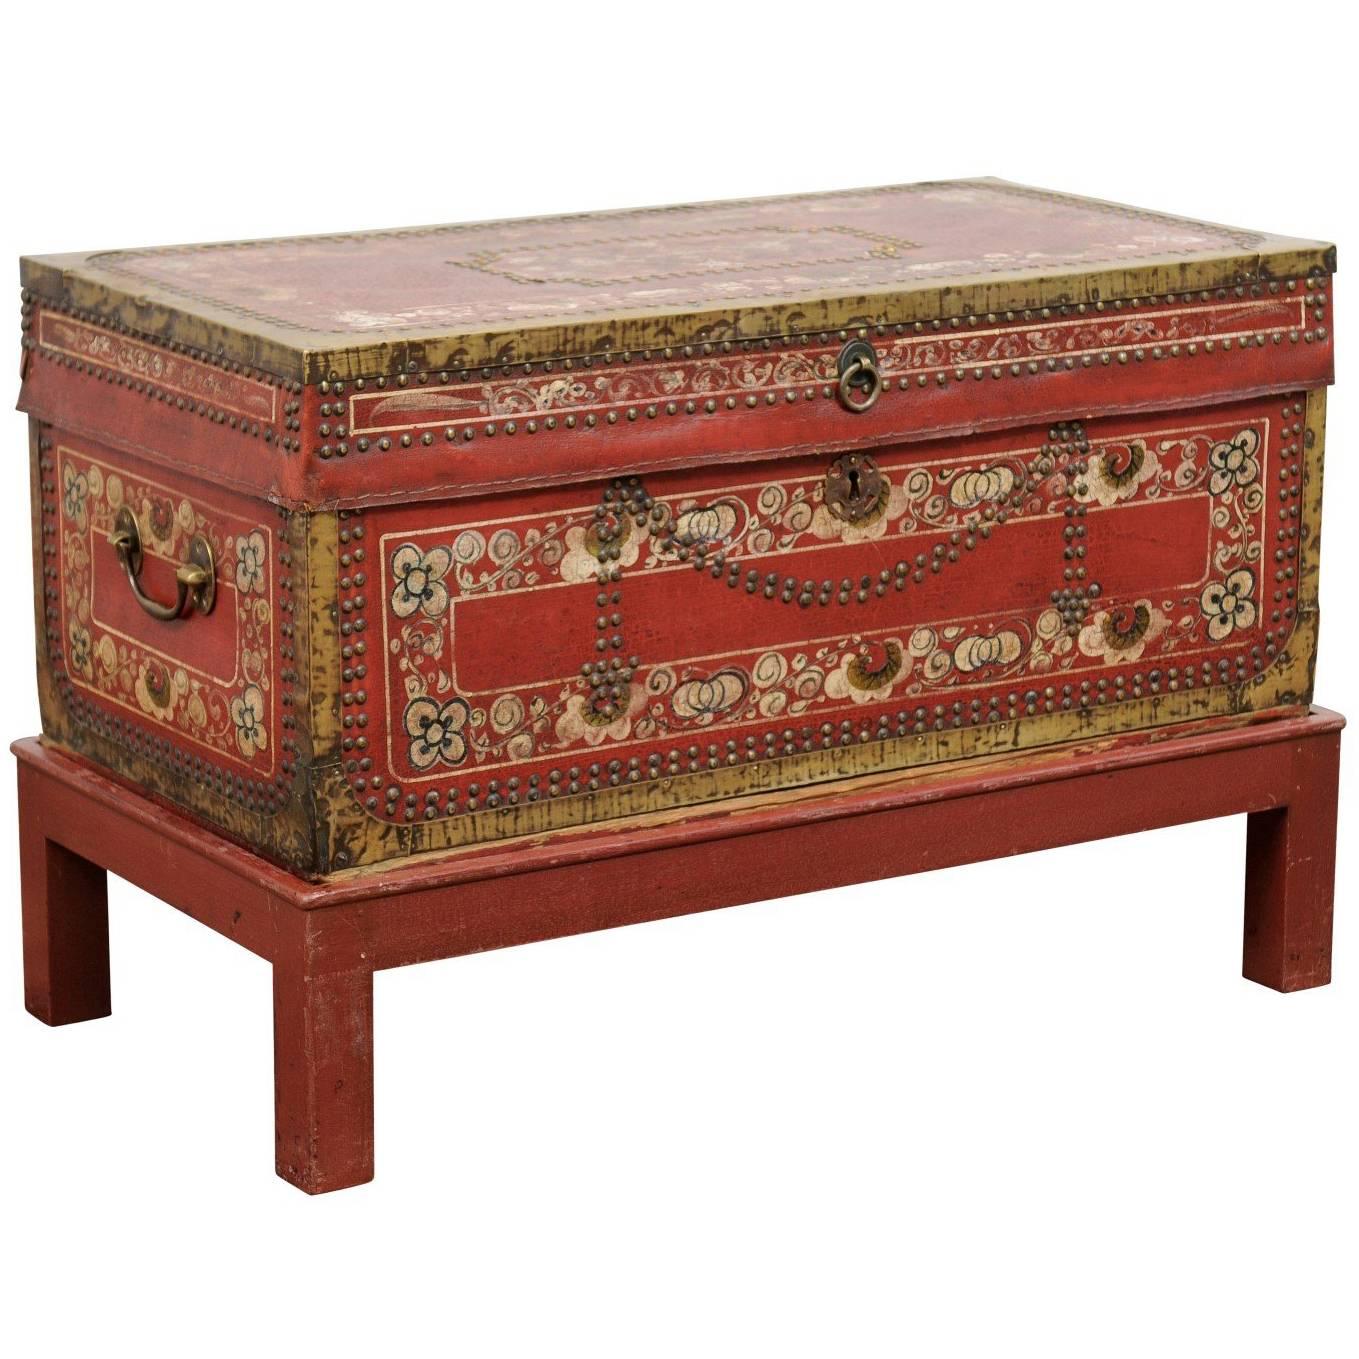 English Camphor Wood Trunk on Stand with Red Painted Leather and Floral Motifs